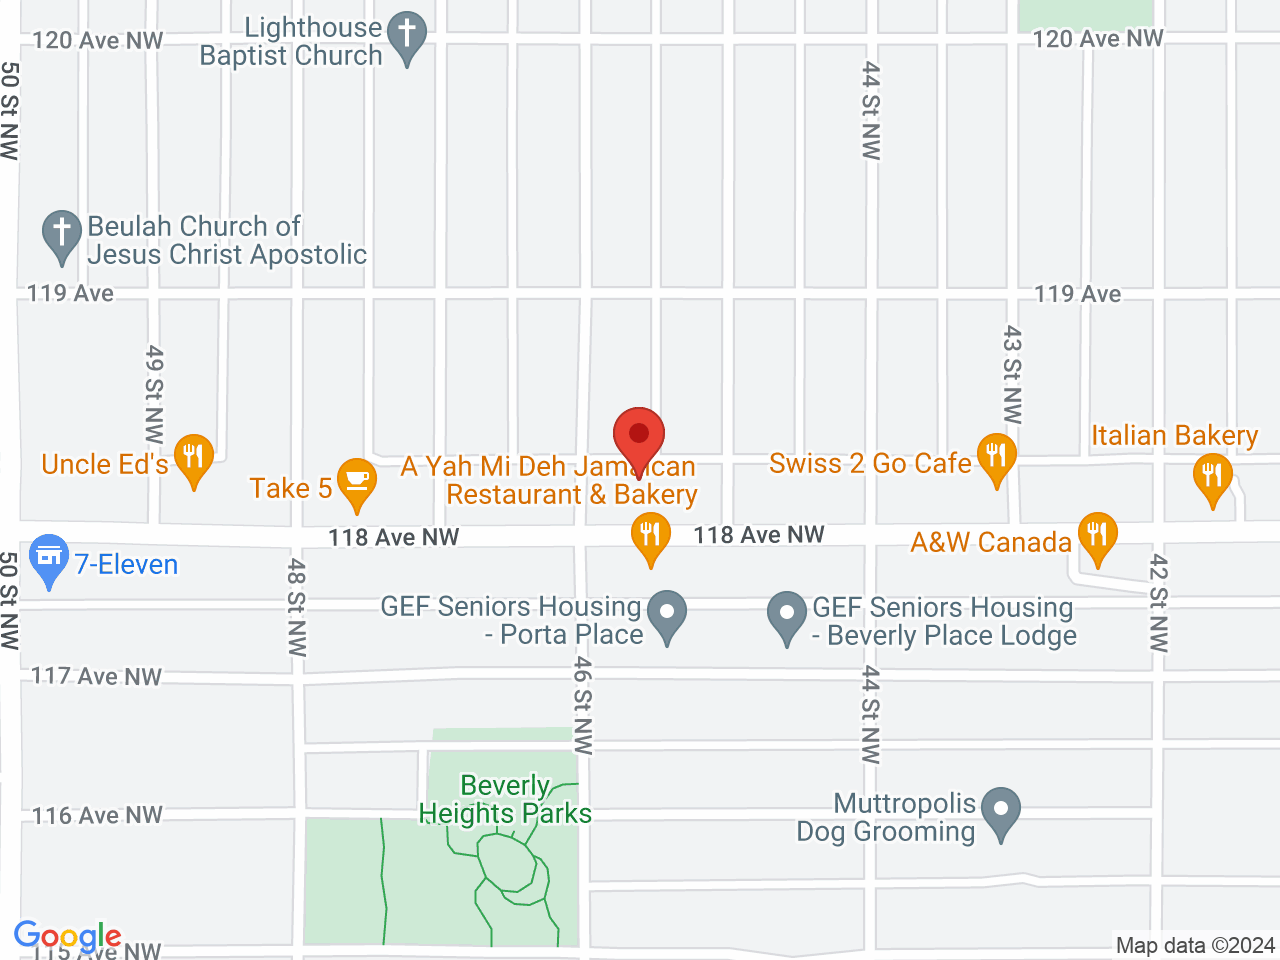 Street map for Delta 9 Cannabis Store, 4512 118 Ave. NW, Edmonton AB